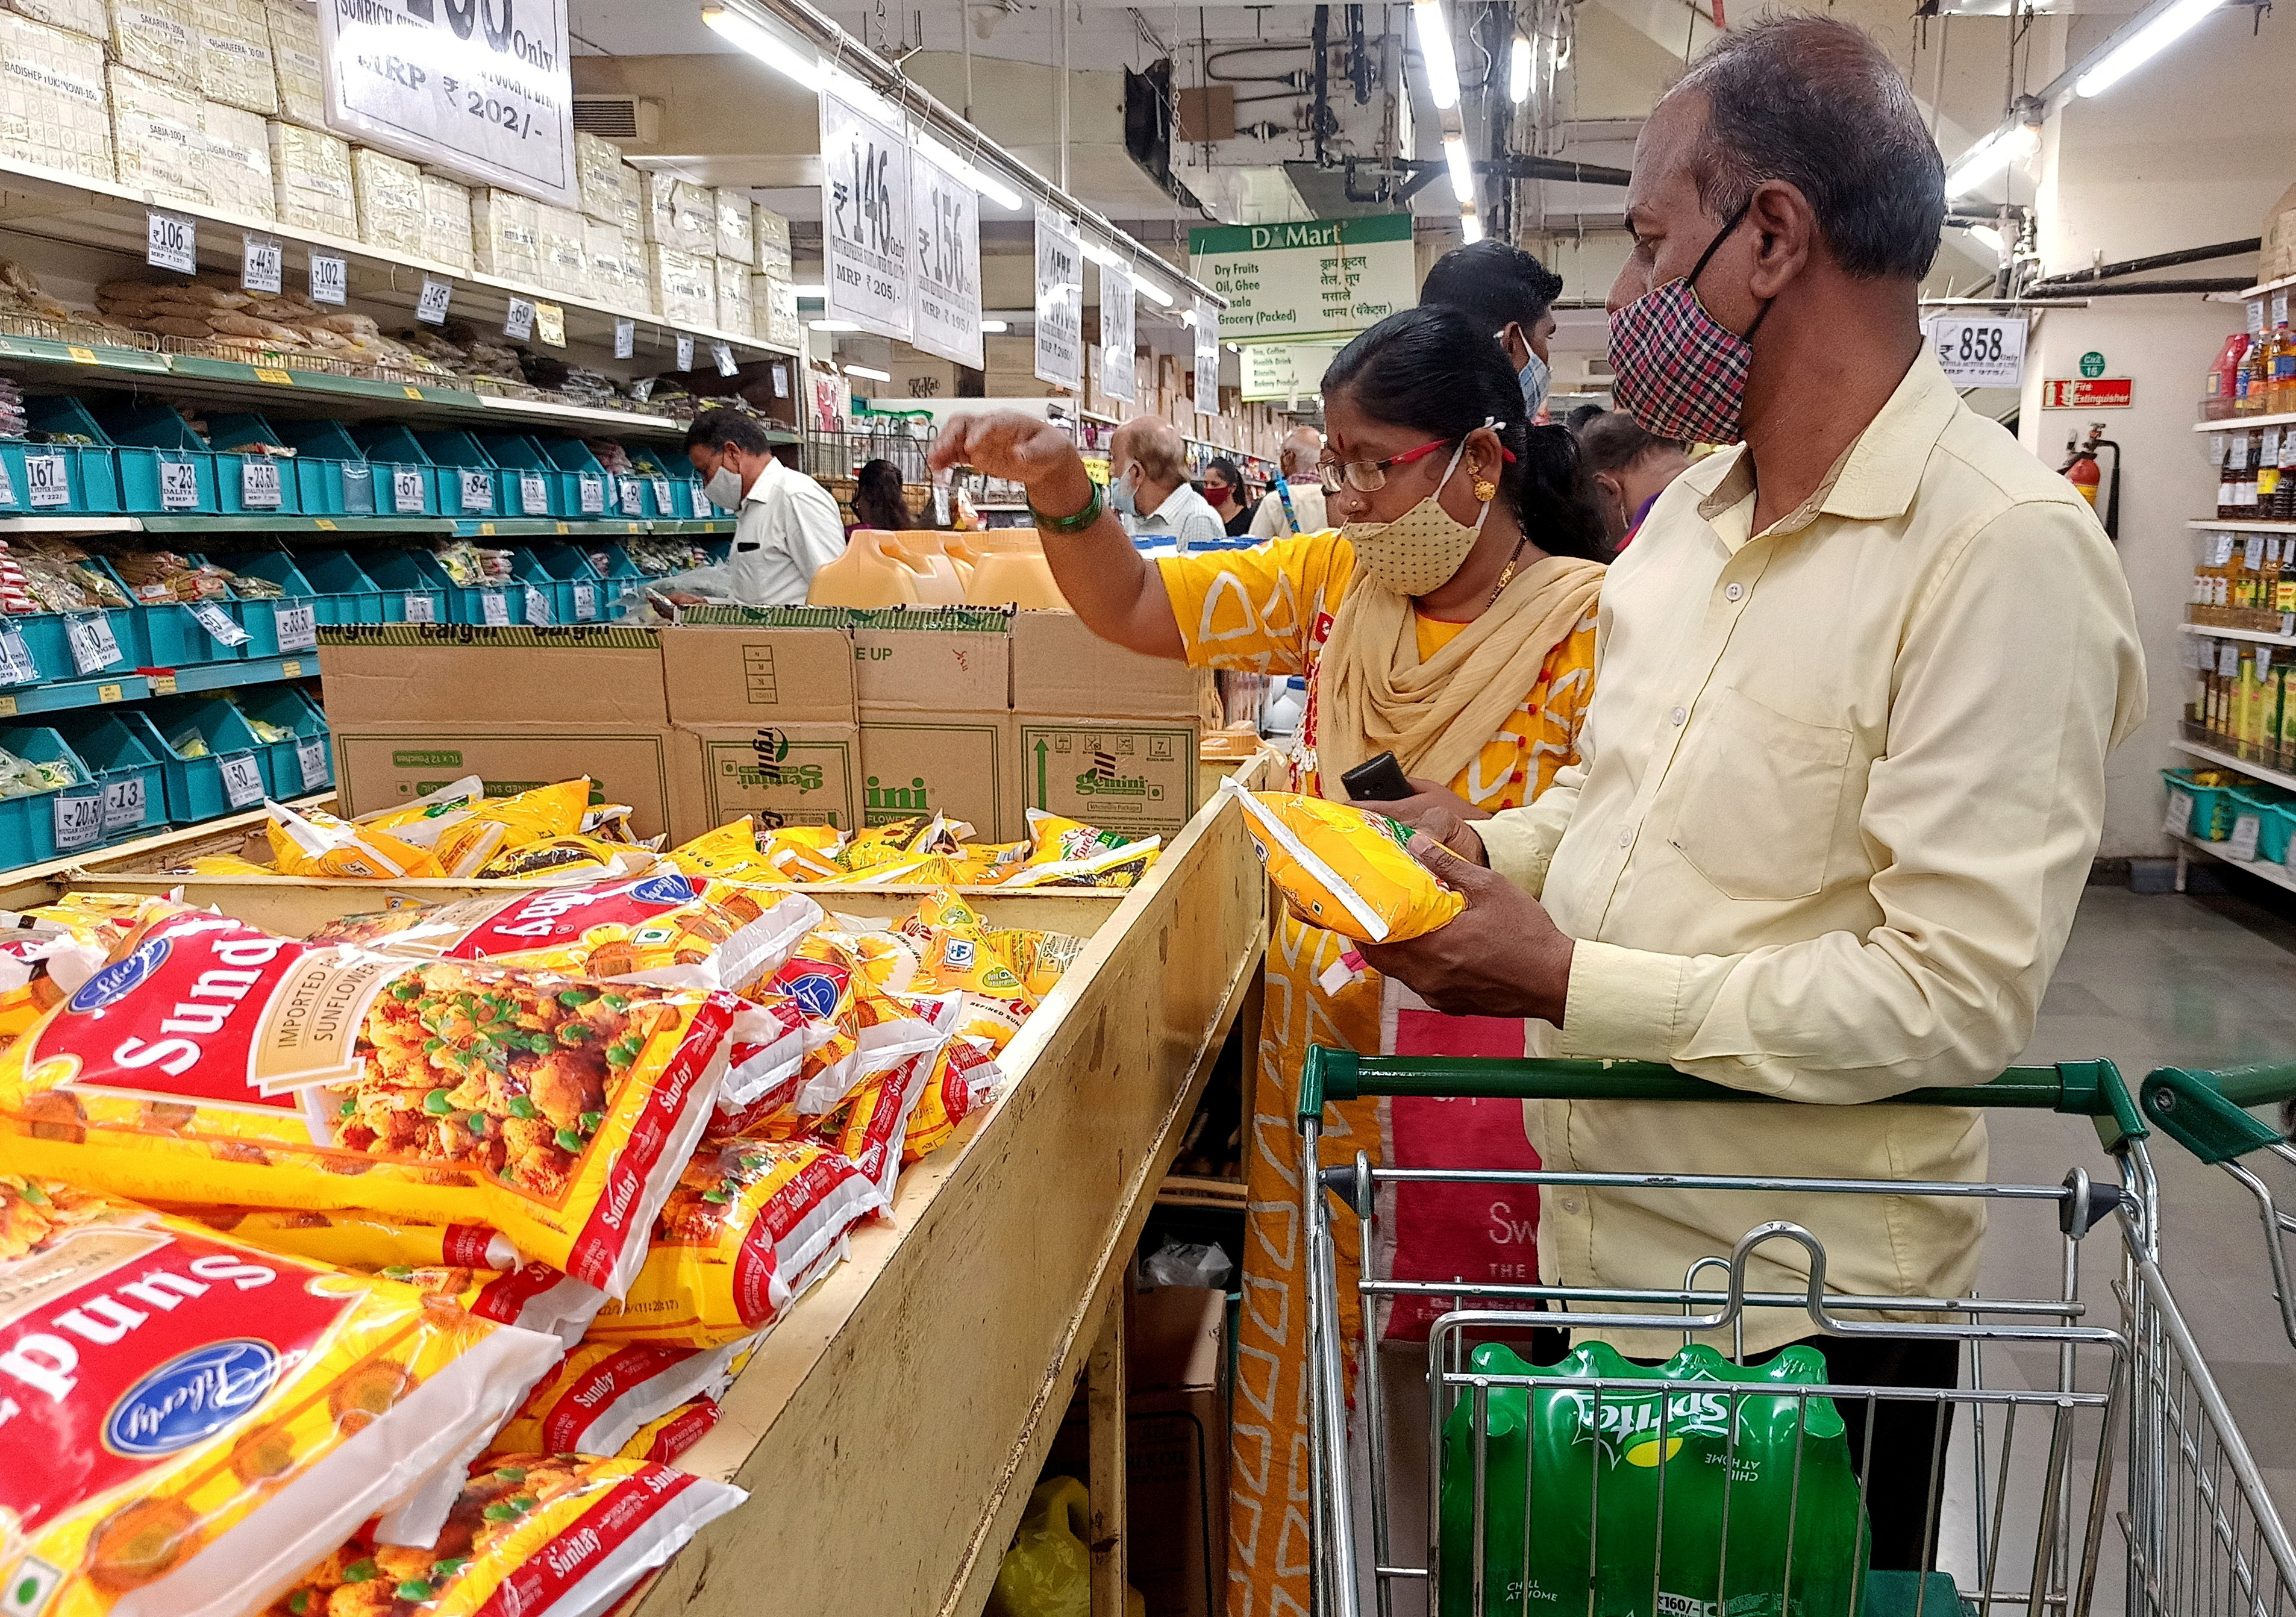 Shoppers purchase packets of vegetable oil at a supermarket in Mumbai